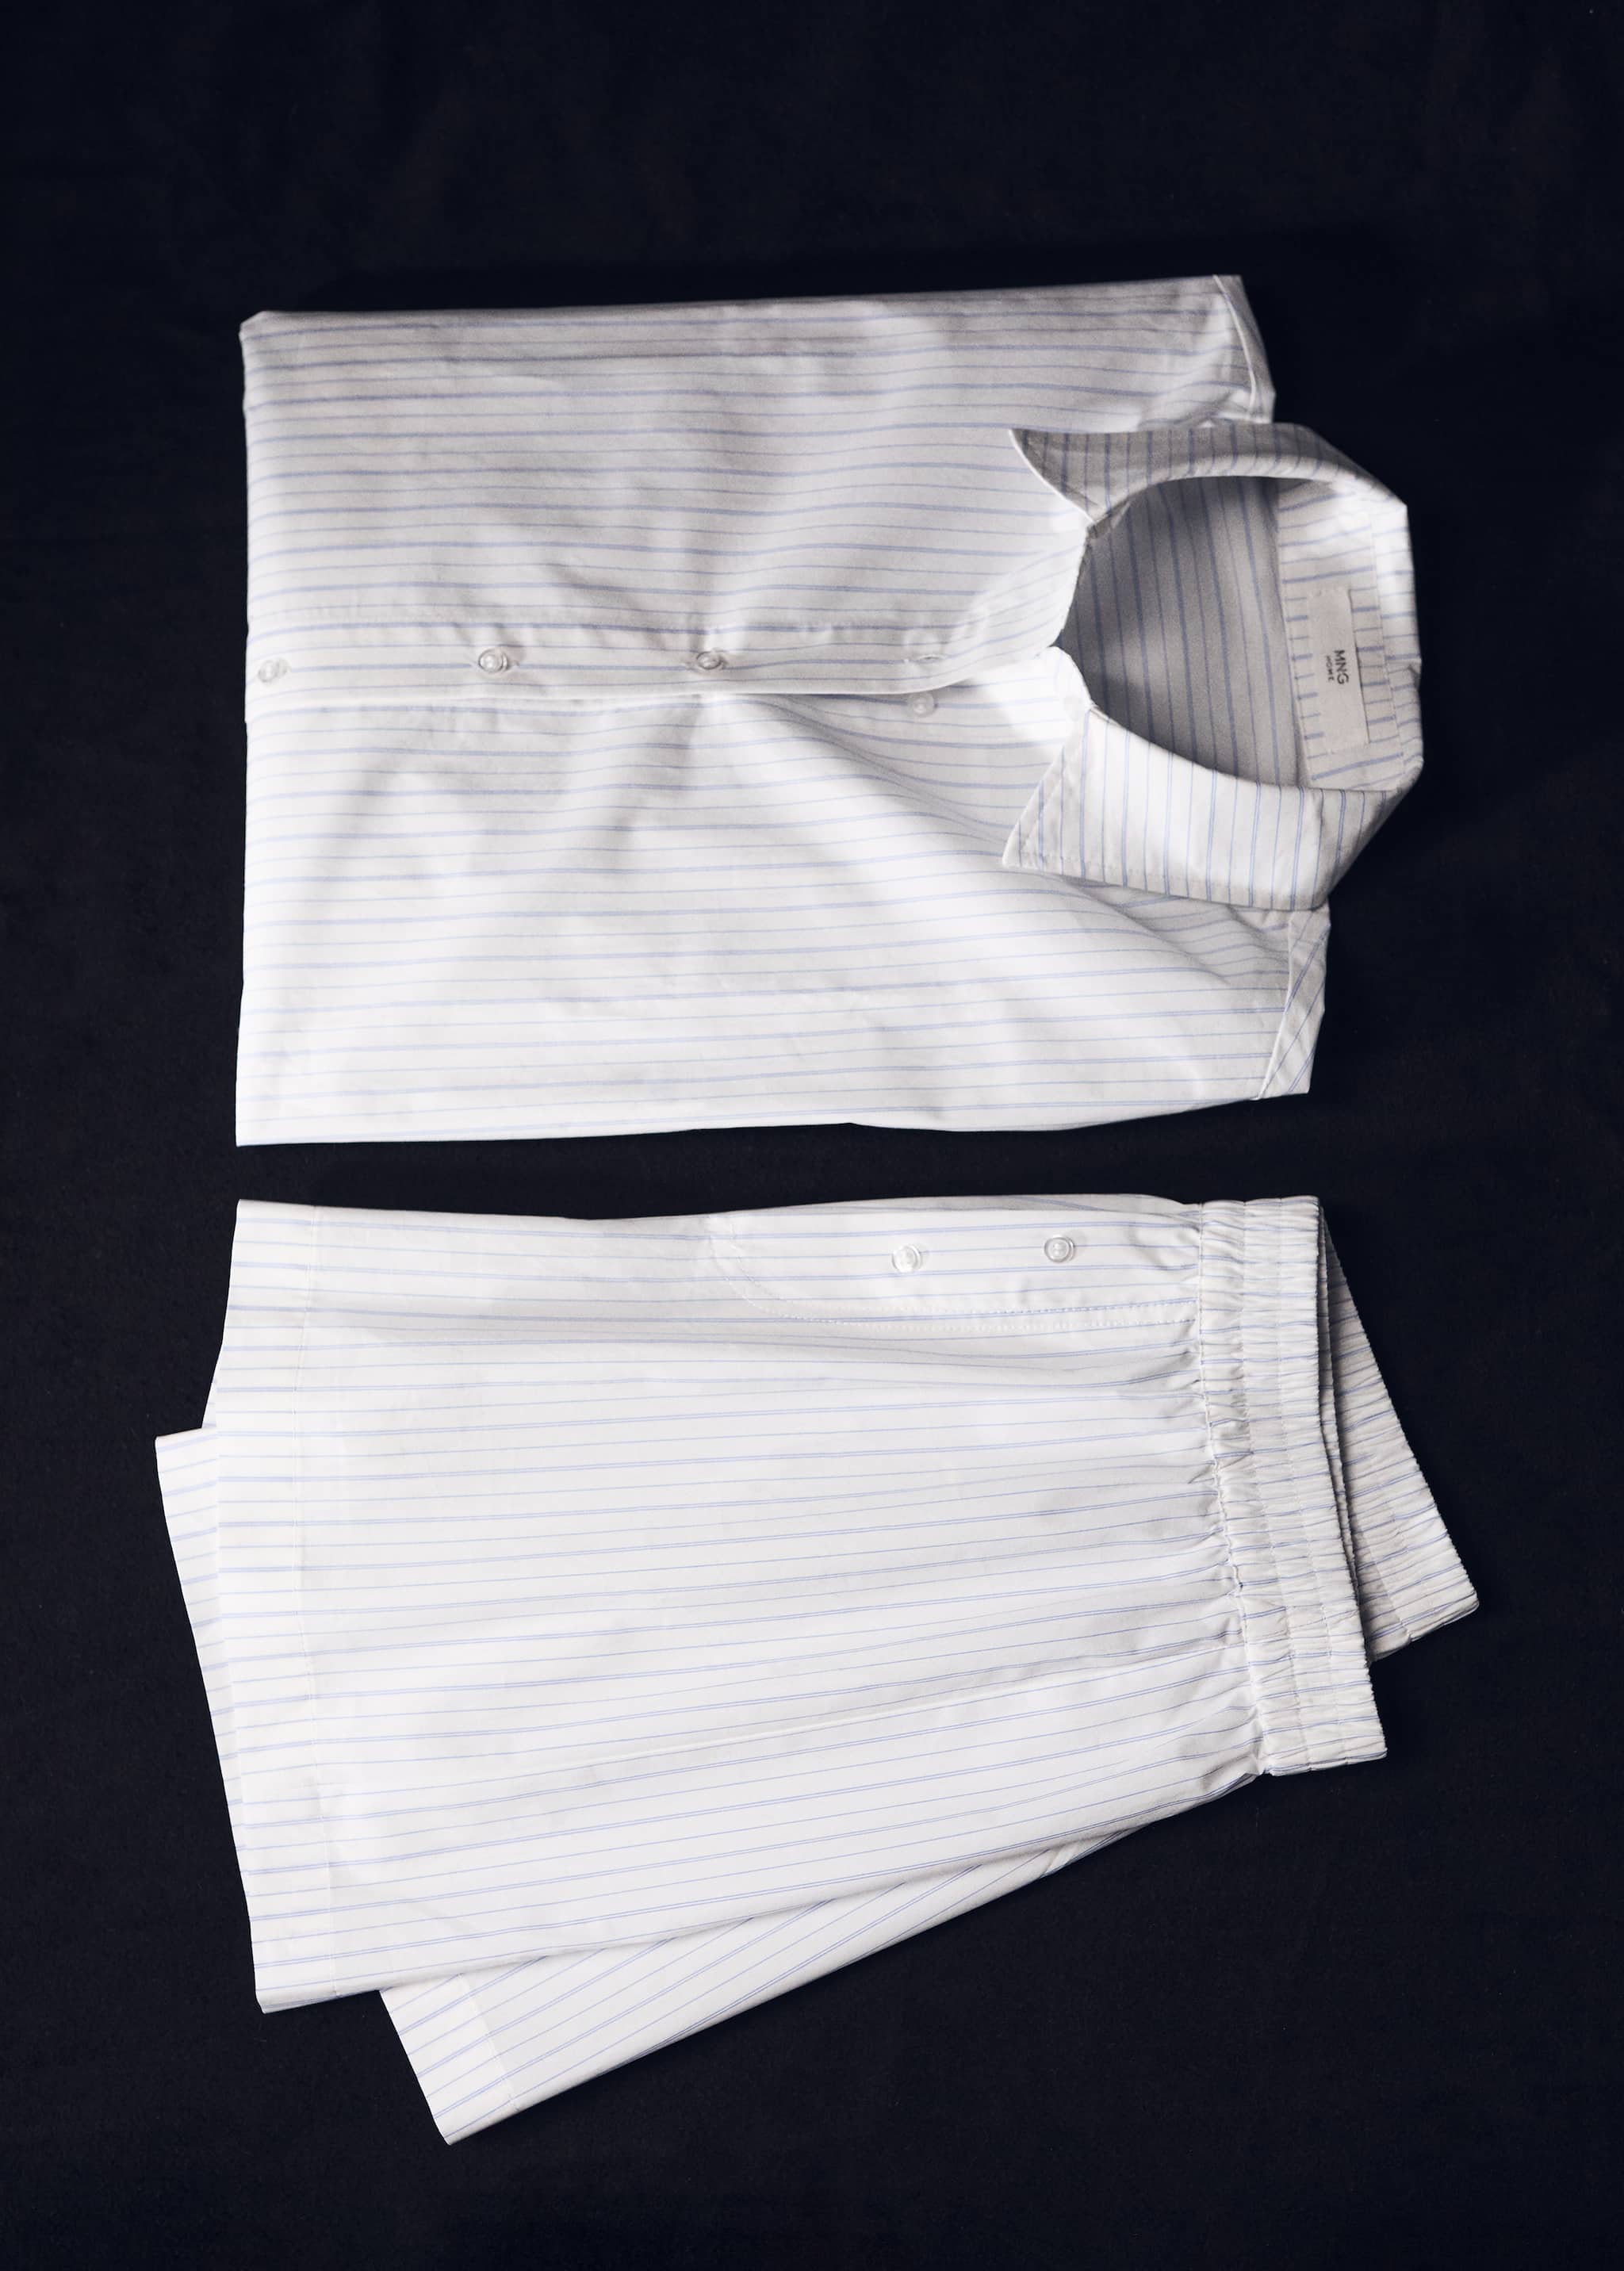 Two-piece striped cotton pyjamas - Details of the article 6